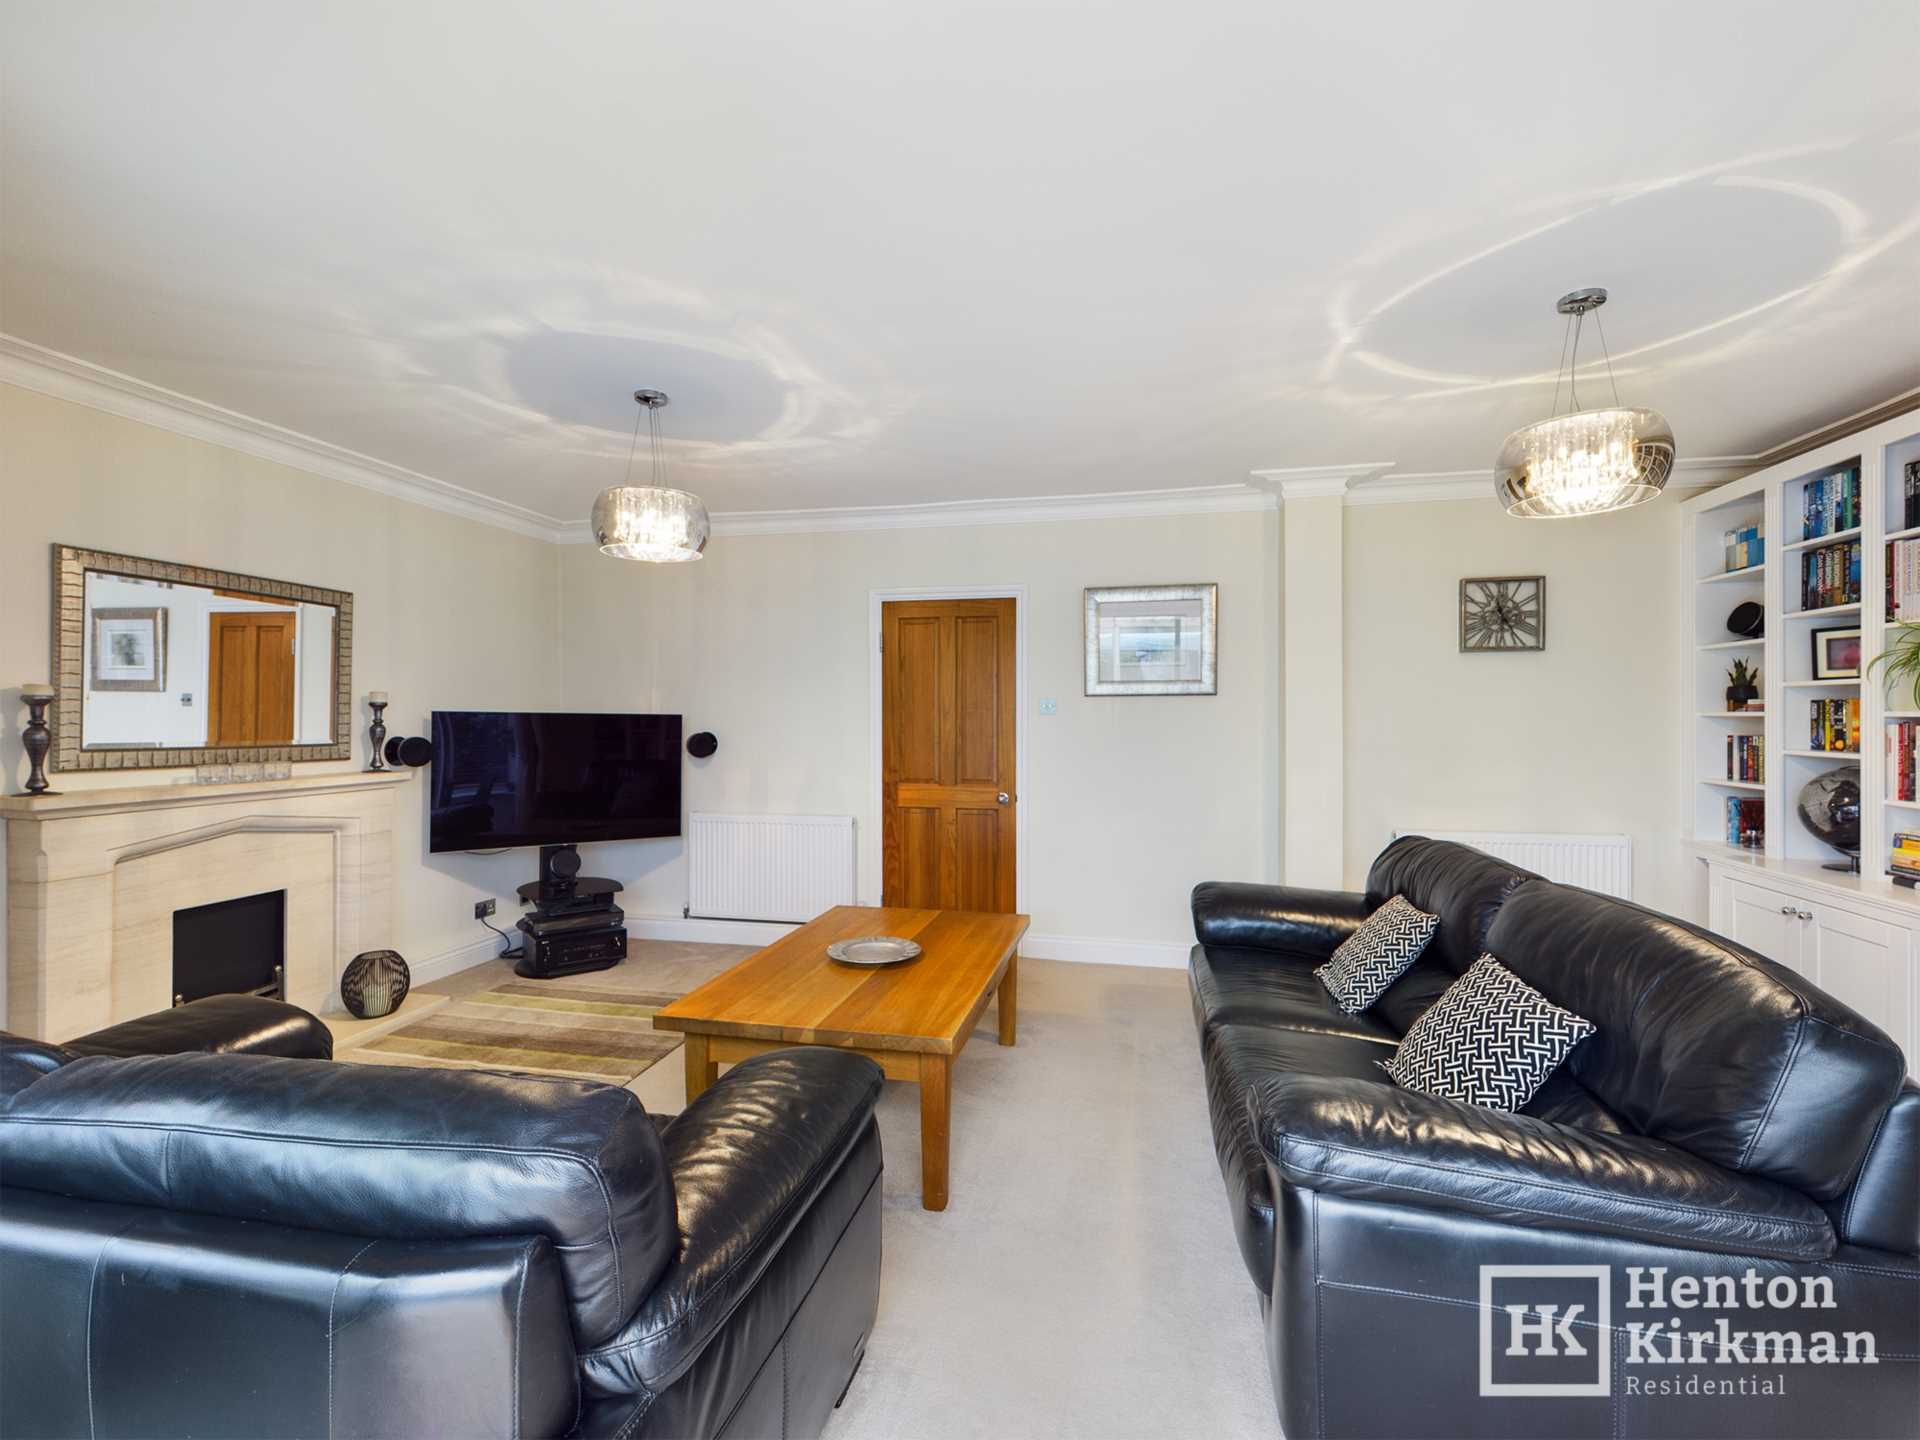 Norsey View Drive, Billericay, Image 10